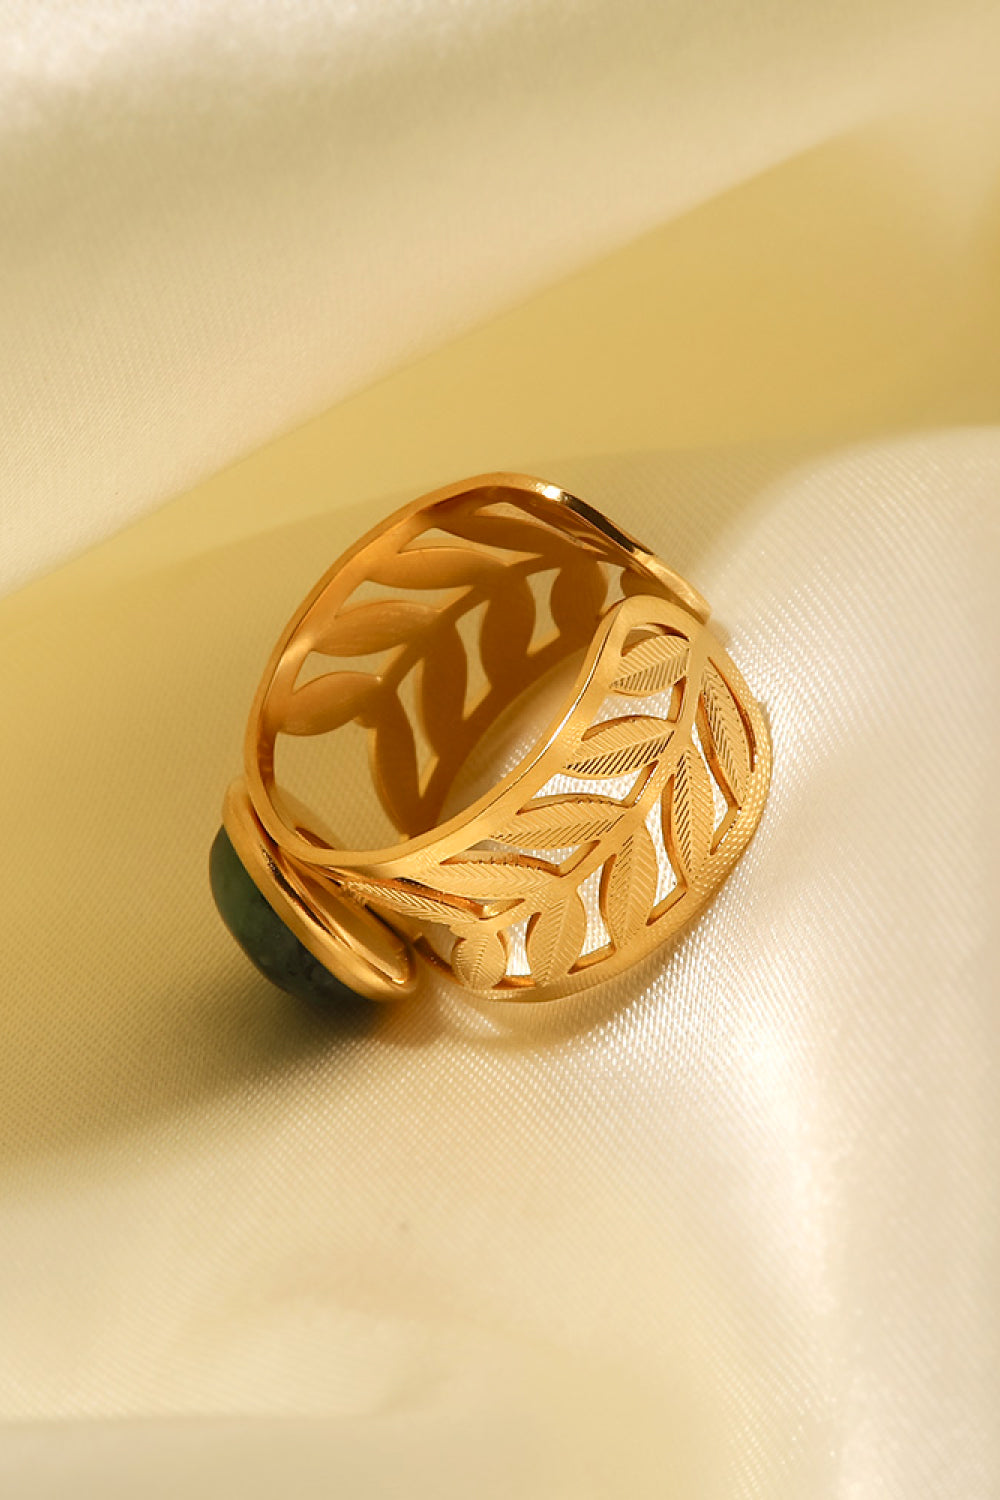 18k Gold Plated Malachite Leaf Ring LMH Beauty